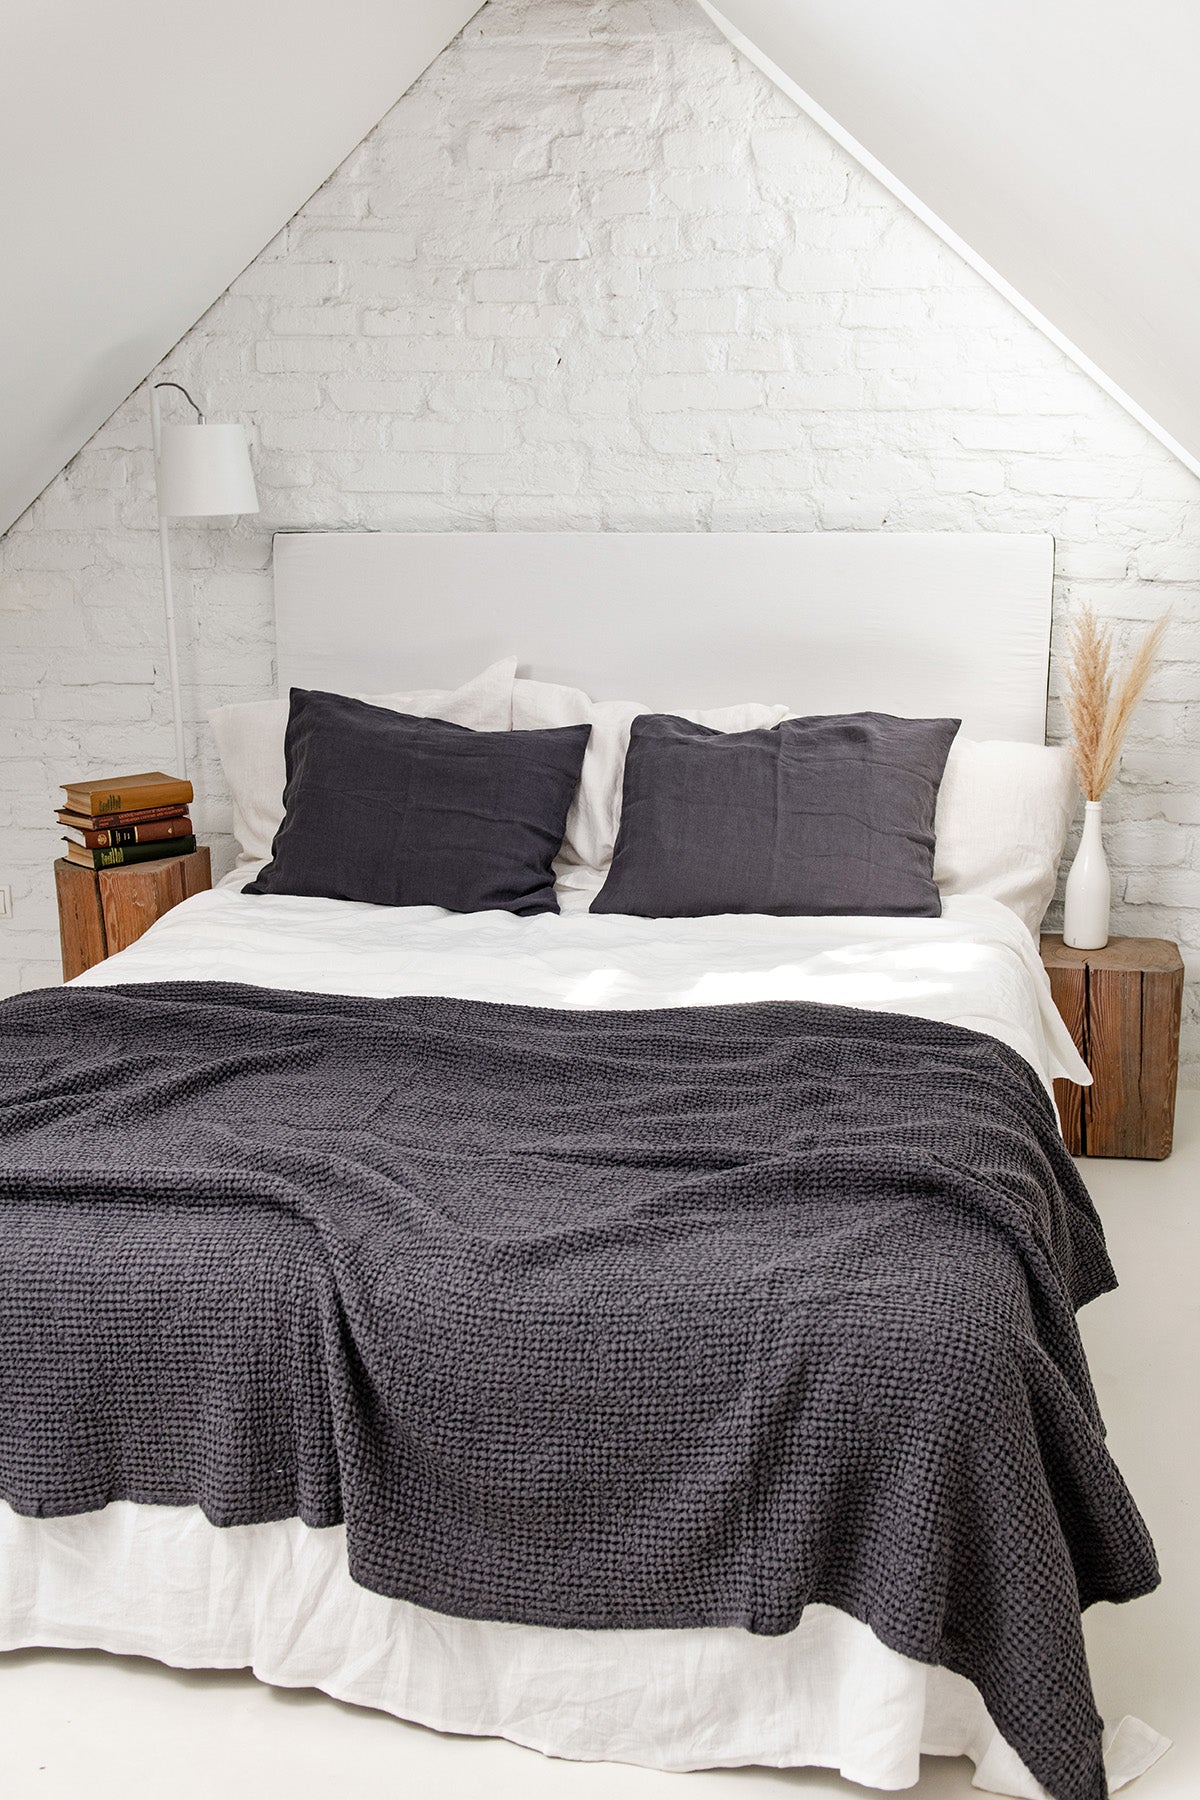 Bed With Linen Waffle Bed Throw in Charcoal On Top And Charcoal Pillowcases By AmourLinen